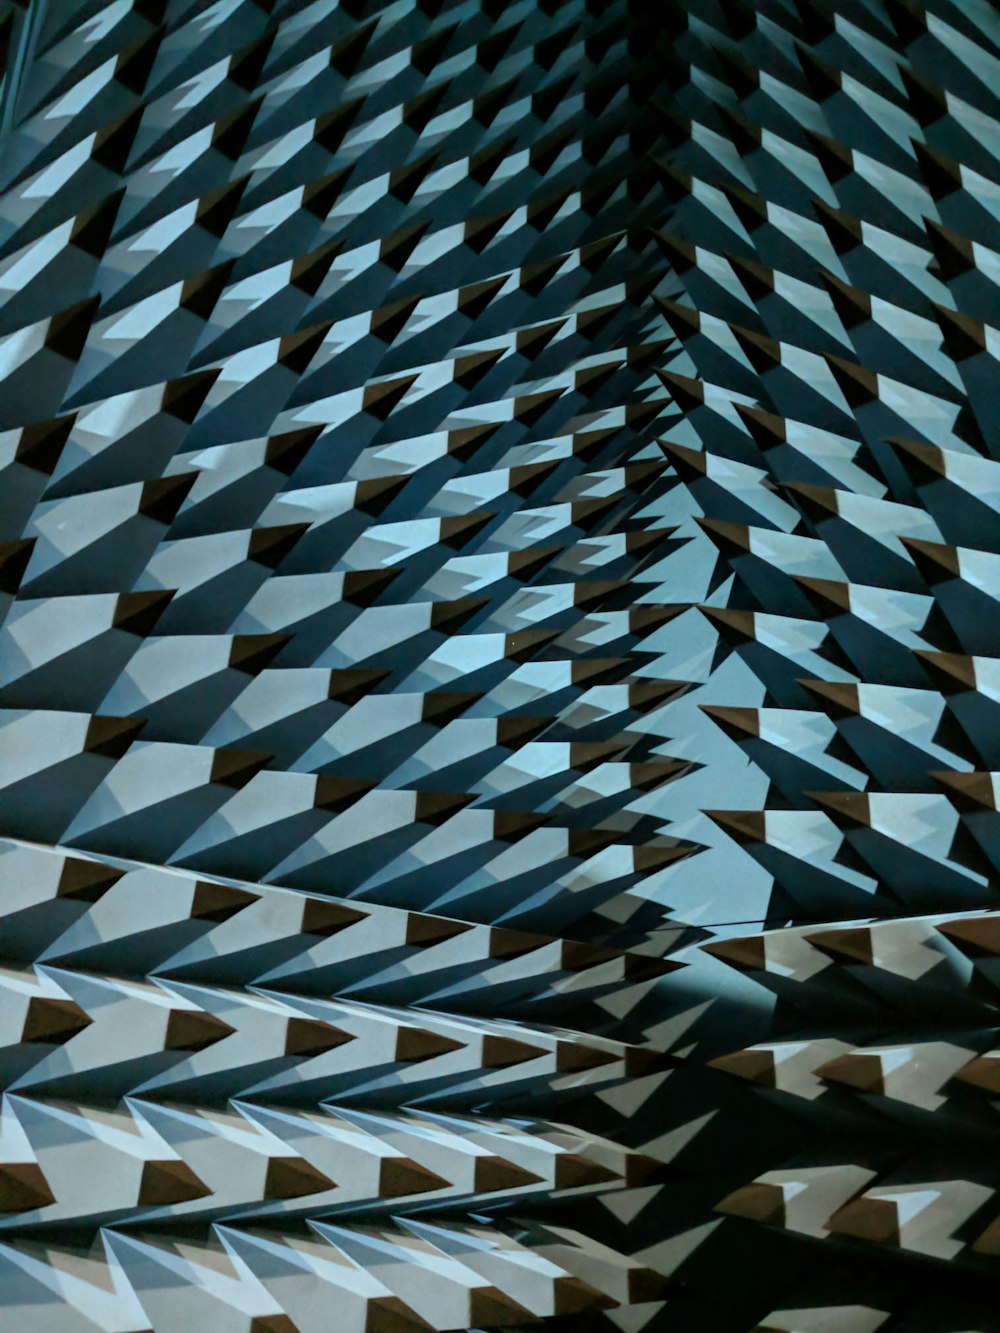 a close up view of a sculpture made of squares